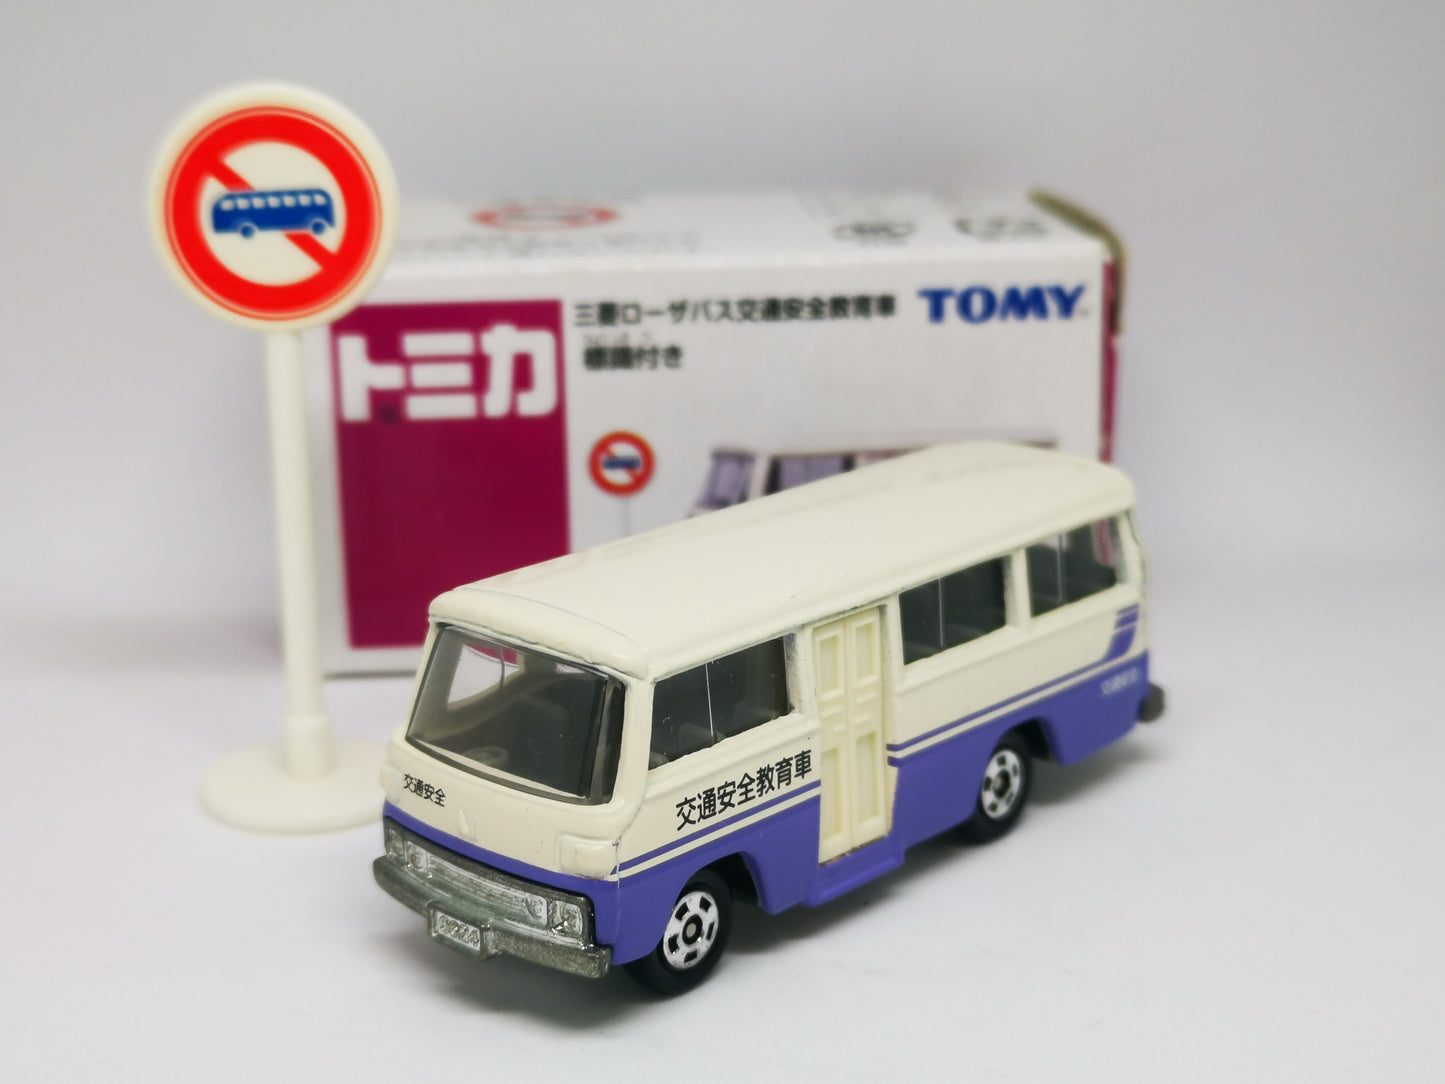 Tomica Aeon exclusive Mitsubishi Rosa Bus Traffic Safety Education Vehicle with Signed